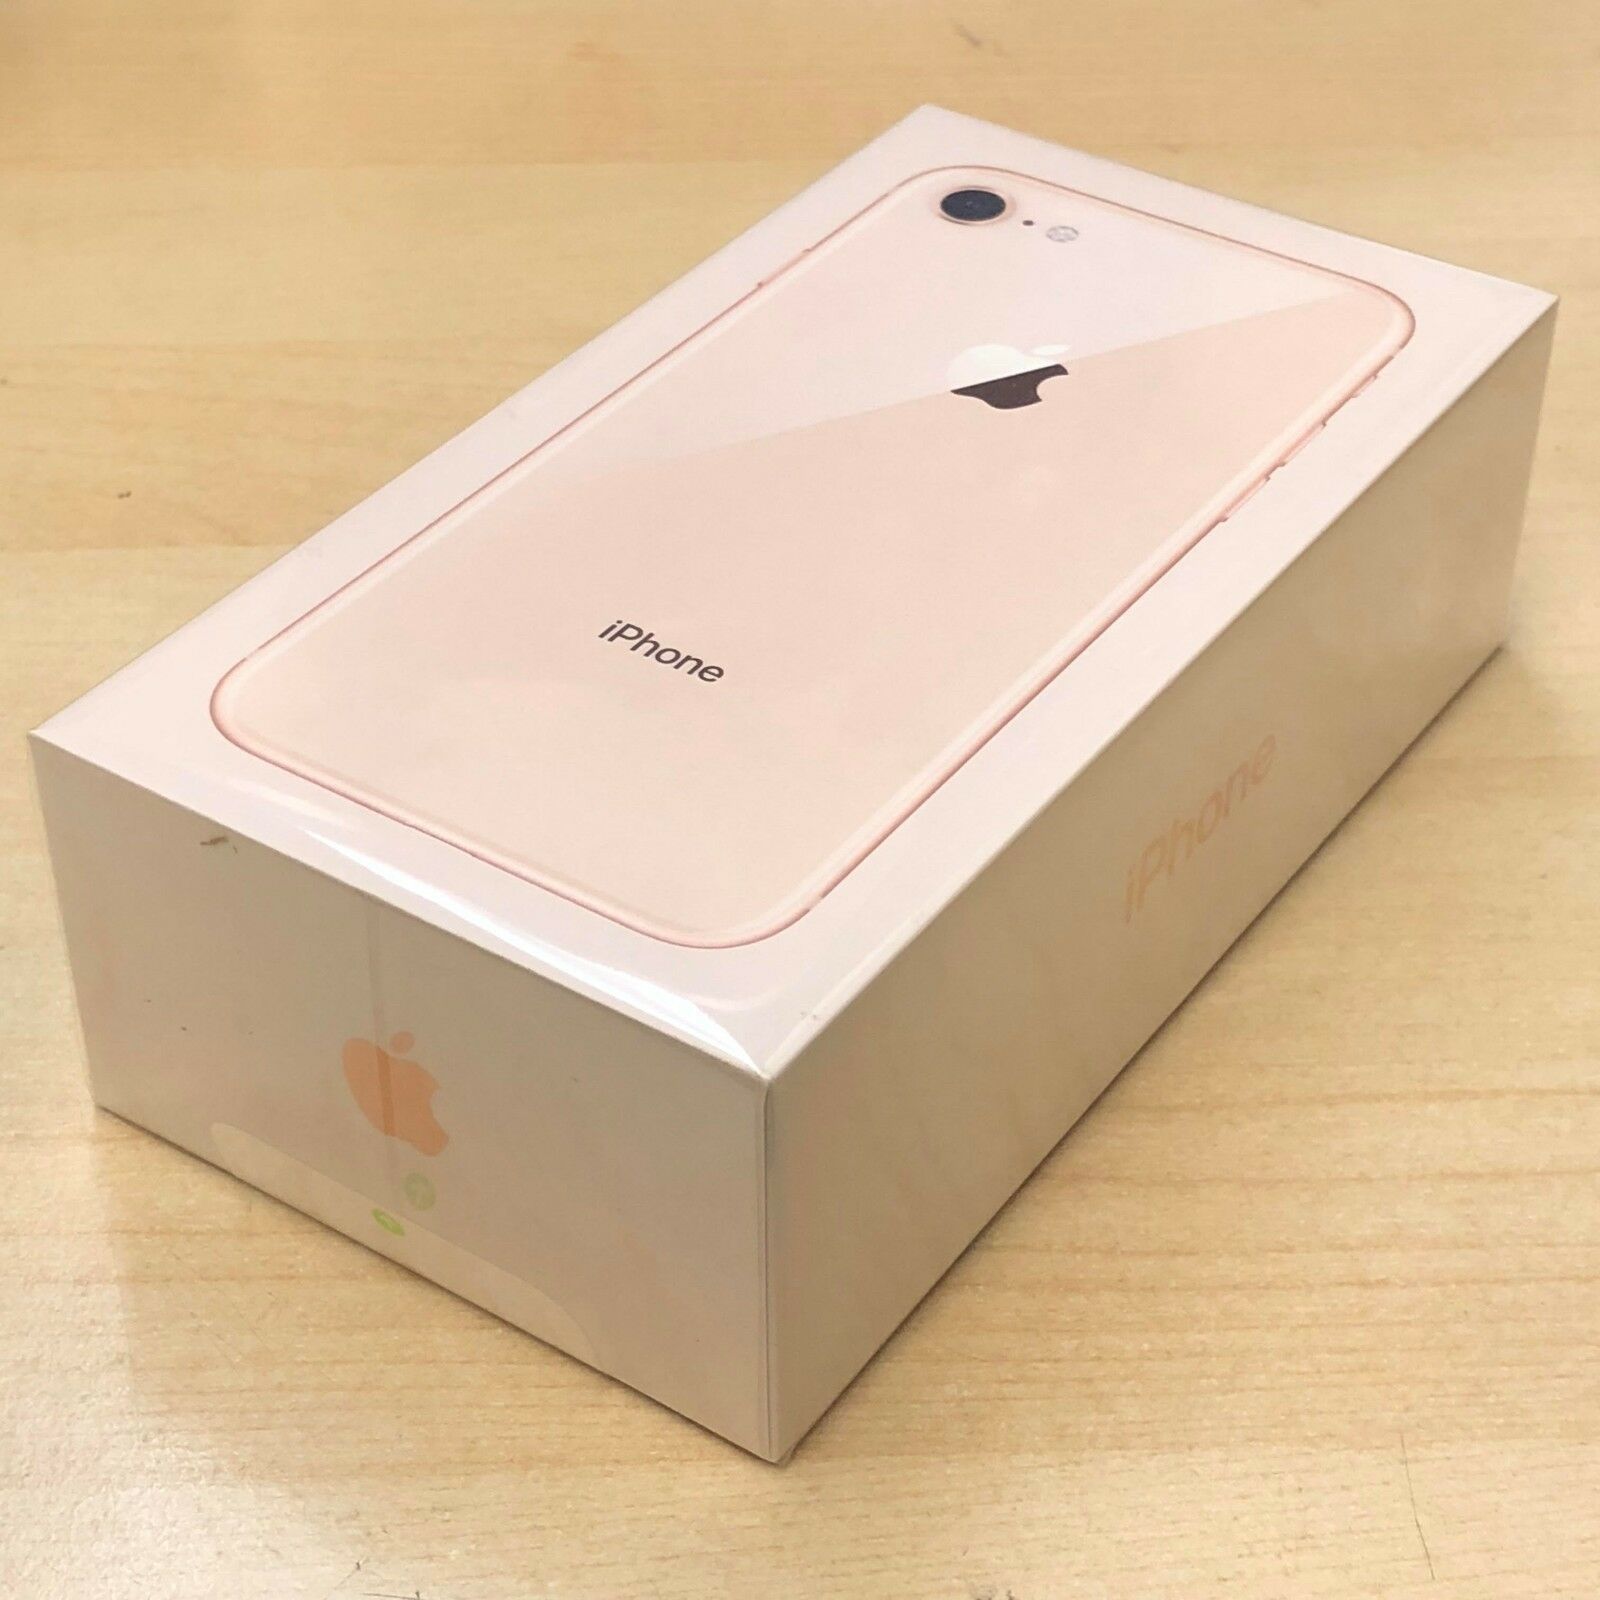 iPhone 8 (AT&T)- 64gb. Gold. New. Sealed in box.